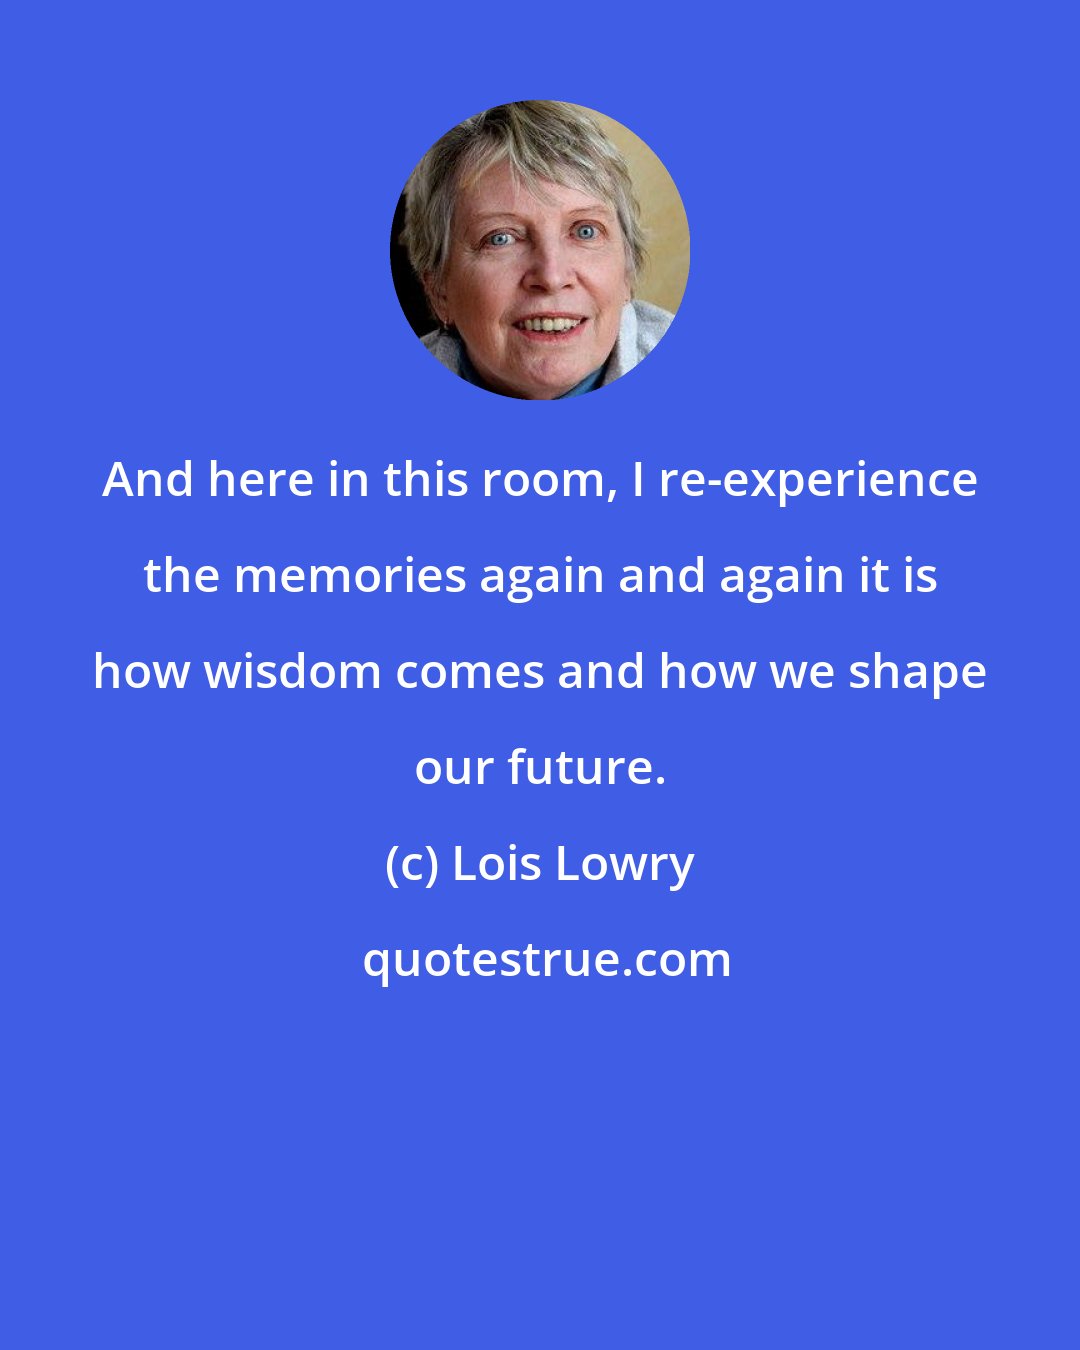 Lois Lowry: And here in this room, I re-experience the memories again and again it is how wisdom comes and how we shape our future.